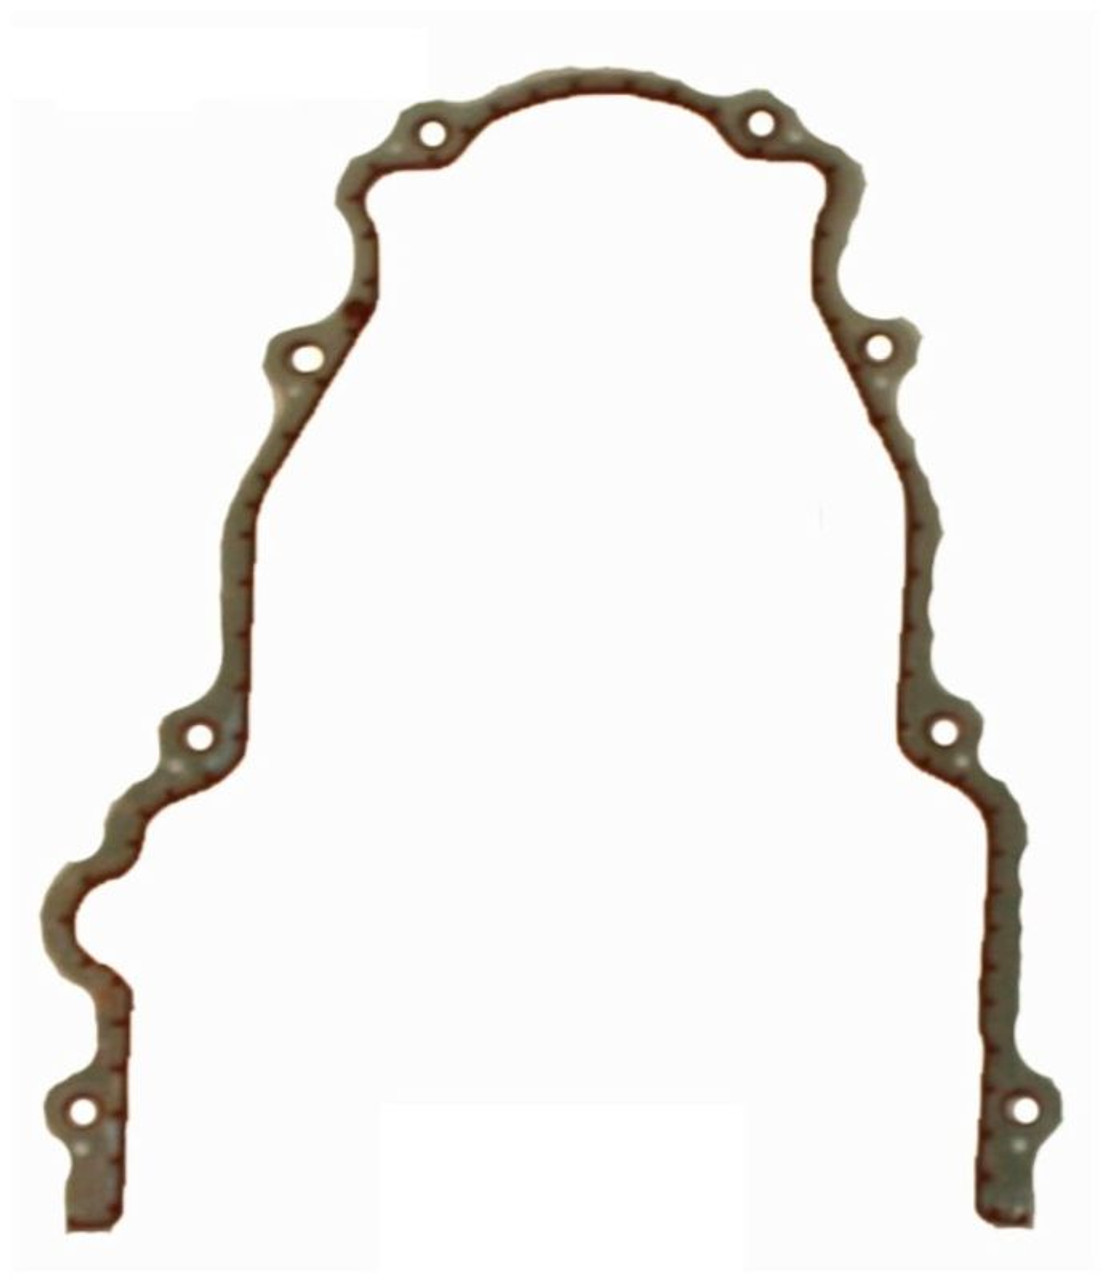 2007 Chevrolet Avalanche 6.0L Engine Timing Cover Gasket TCG293-A -386